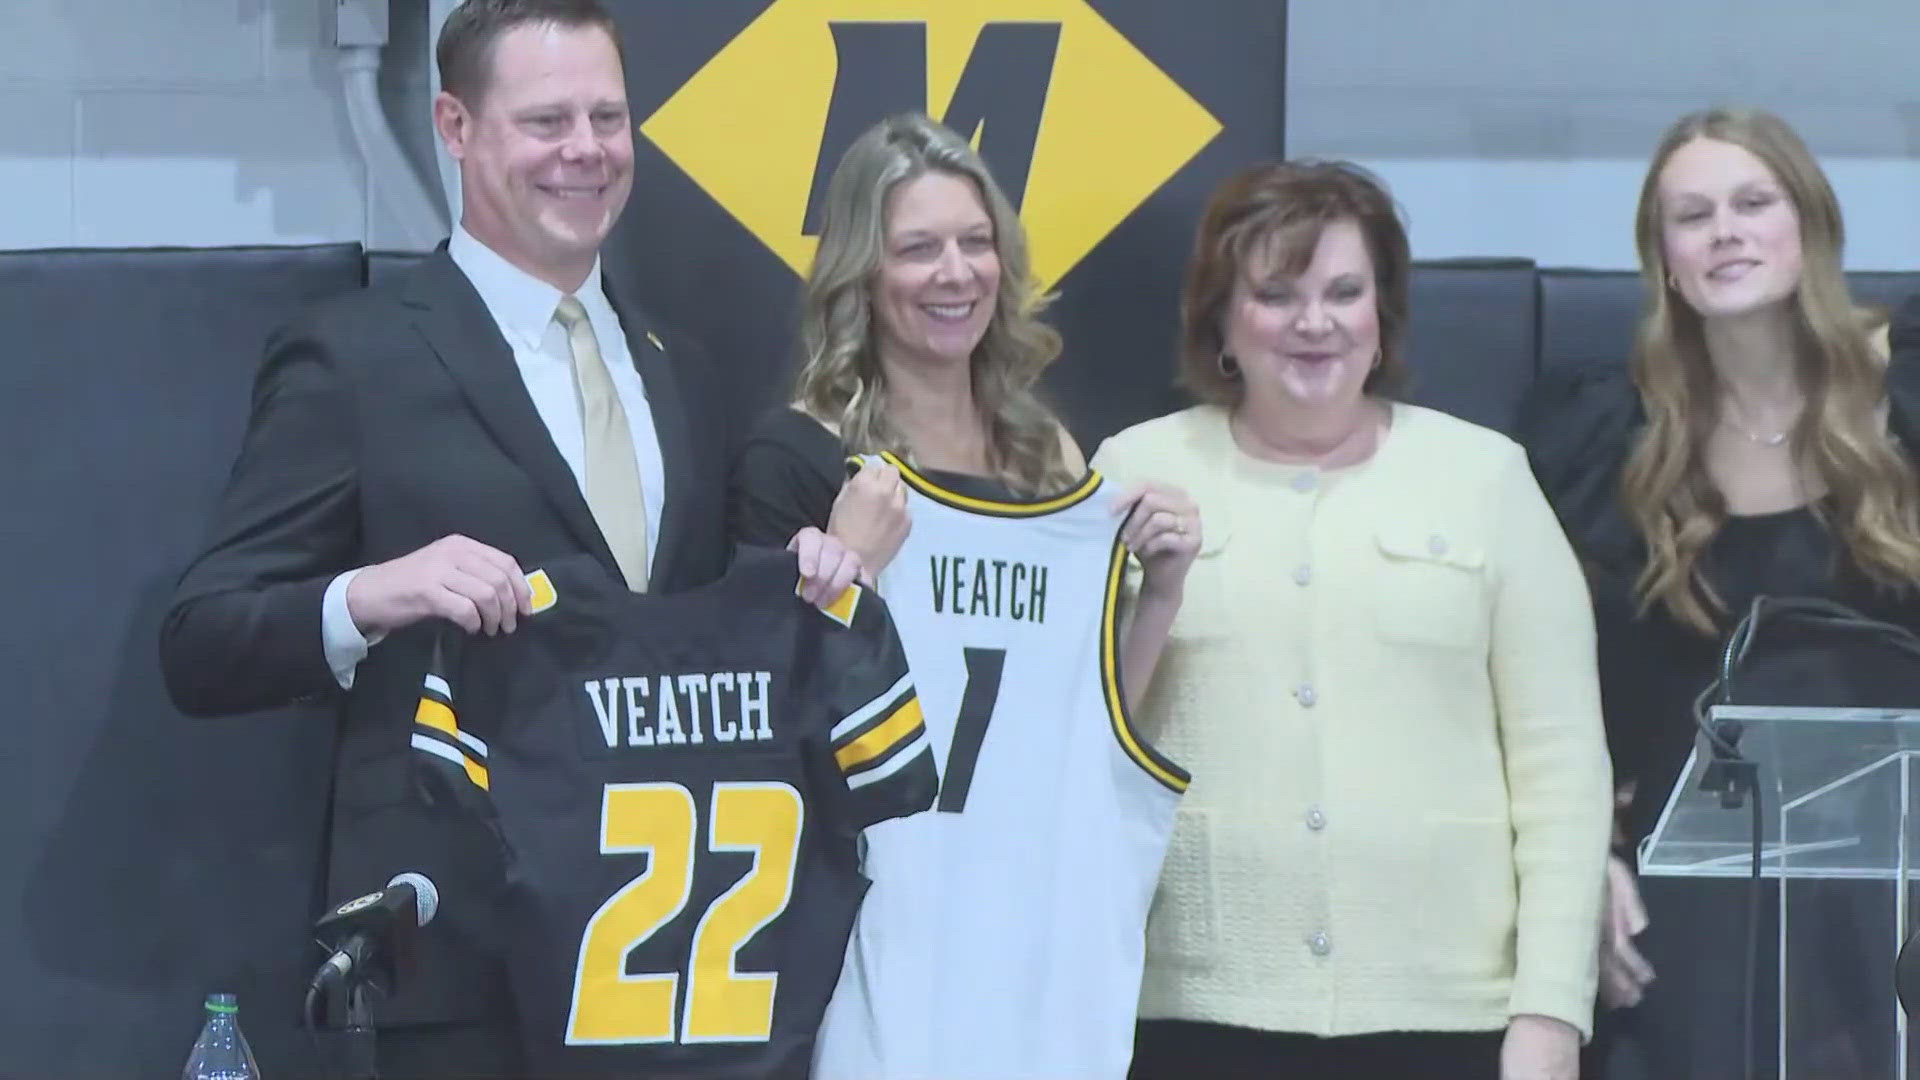 Mizzou officially introduced the new director of athletics today. Laird Veatch used to be an assistant AD in Columbia in the late 90s and early 2000s.